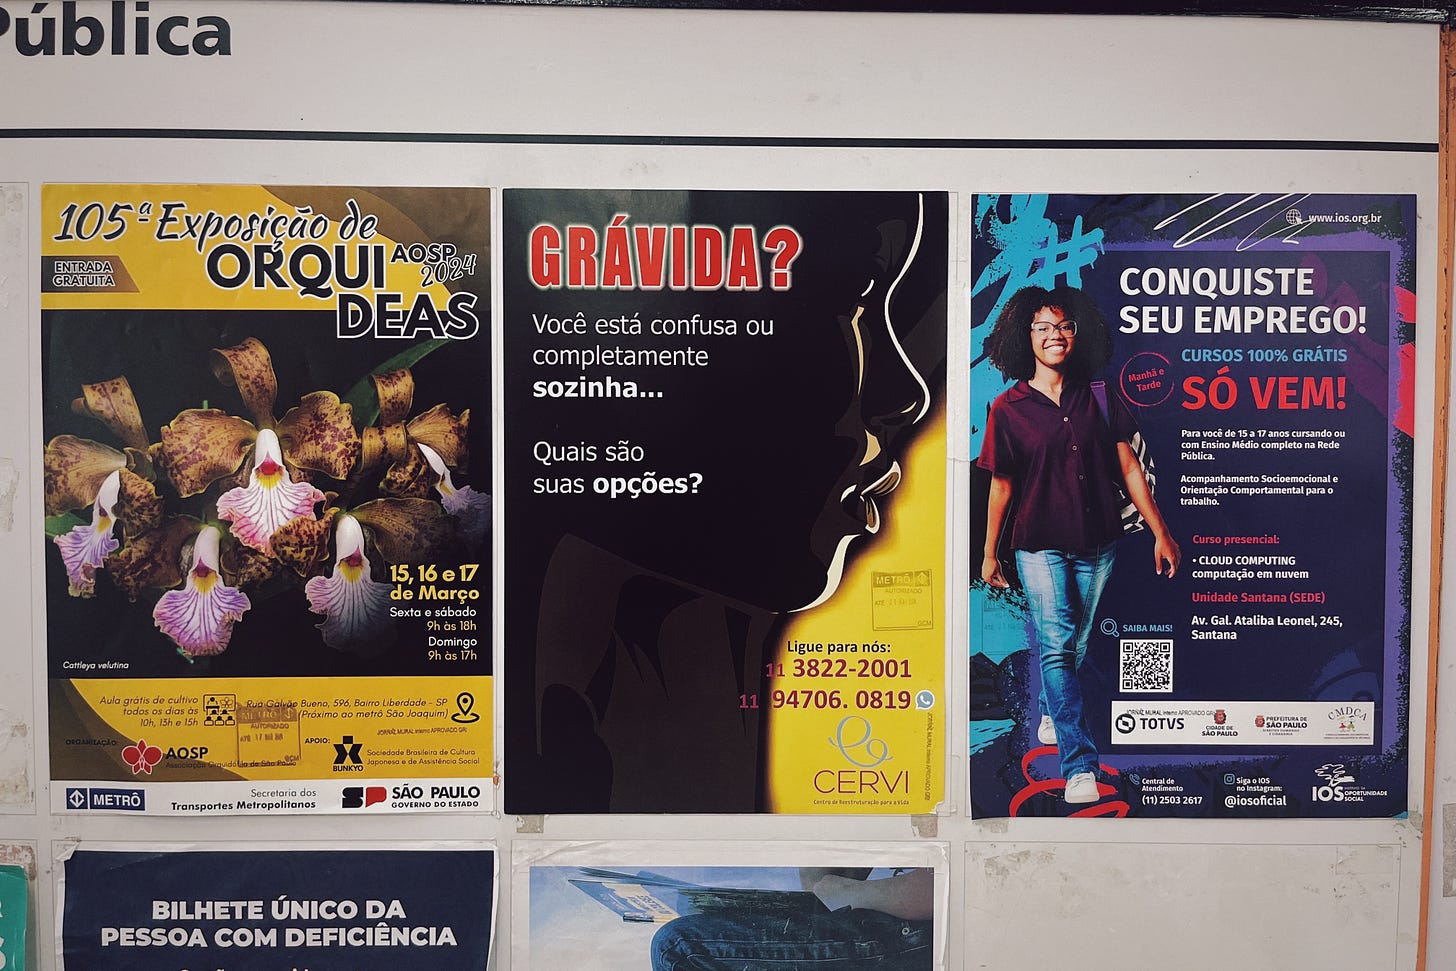 An ad for CERVI in one of São Paulo’s busiest metro stations. In English, it says “PREGNANT? Are you confused or completely alone… What are your options?” The ad is placed on a public information board.